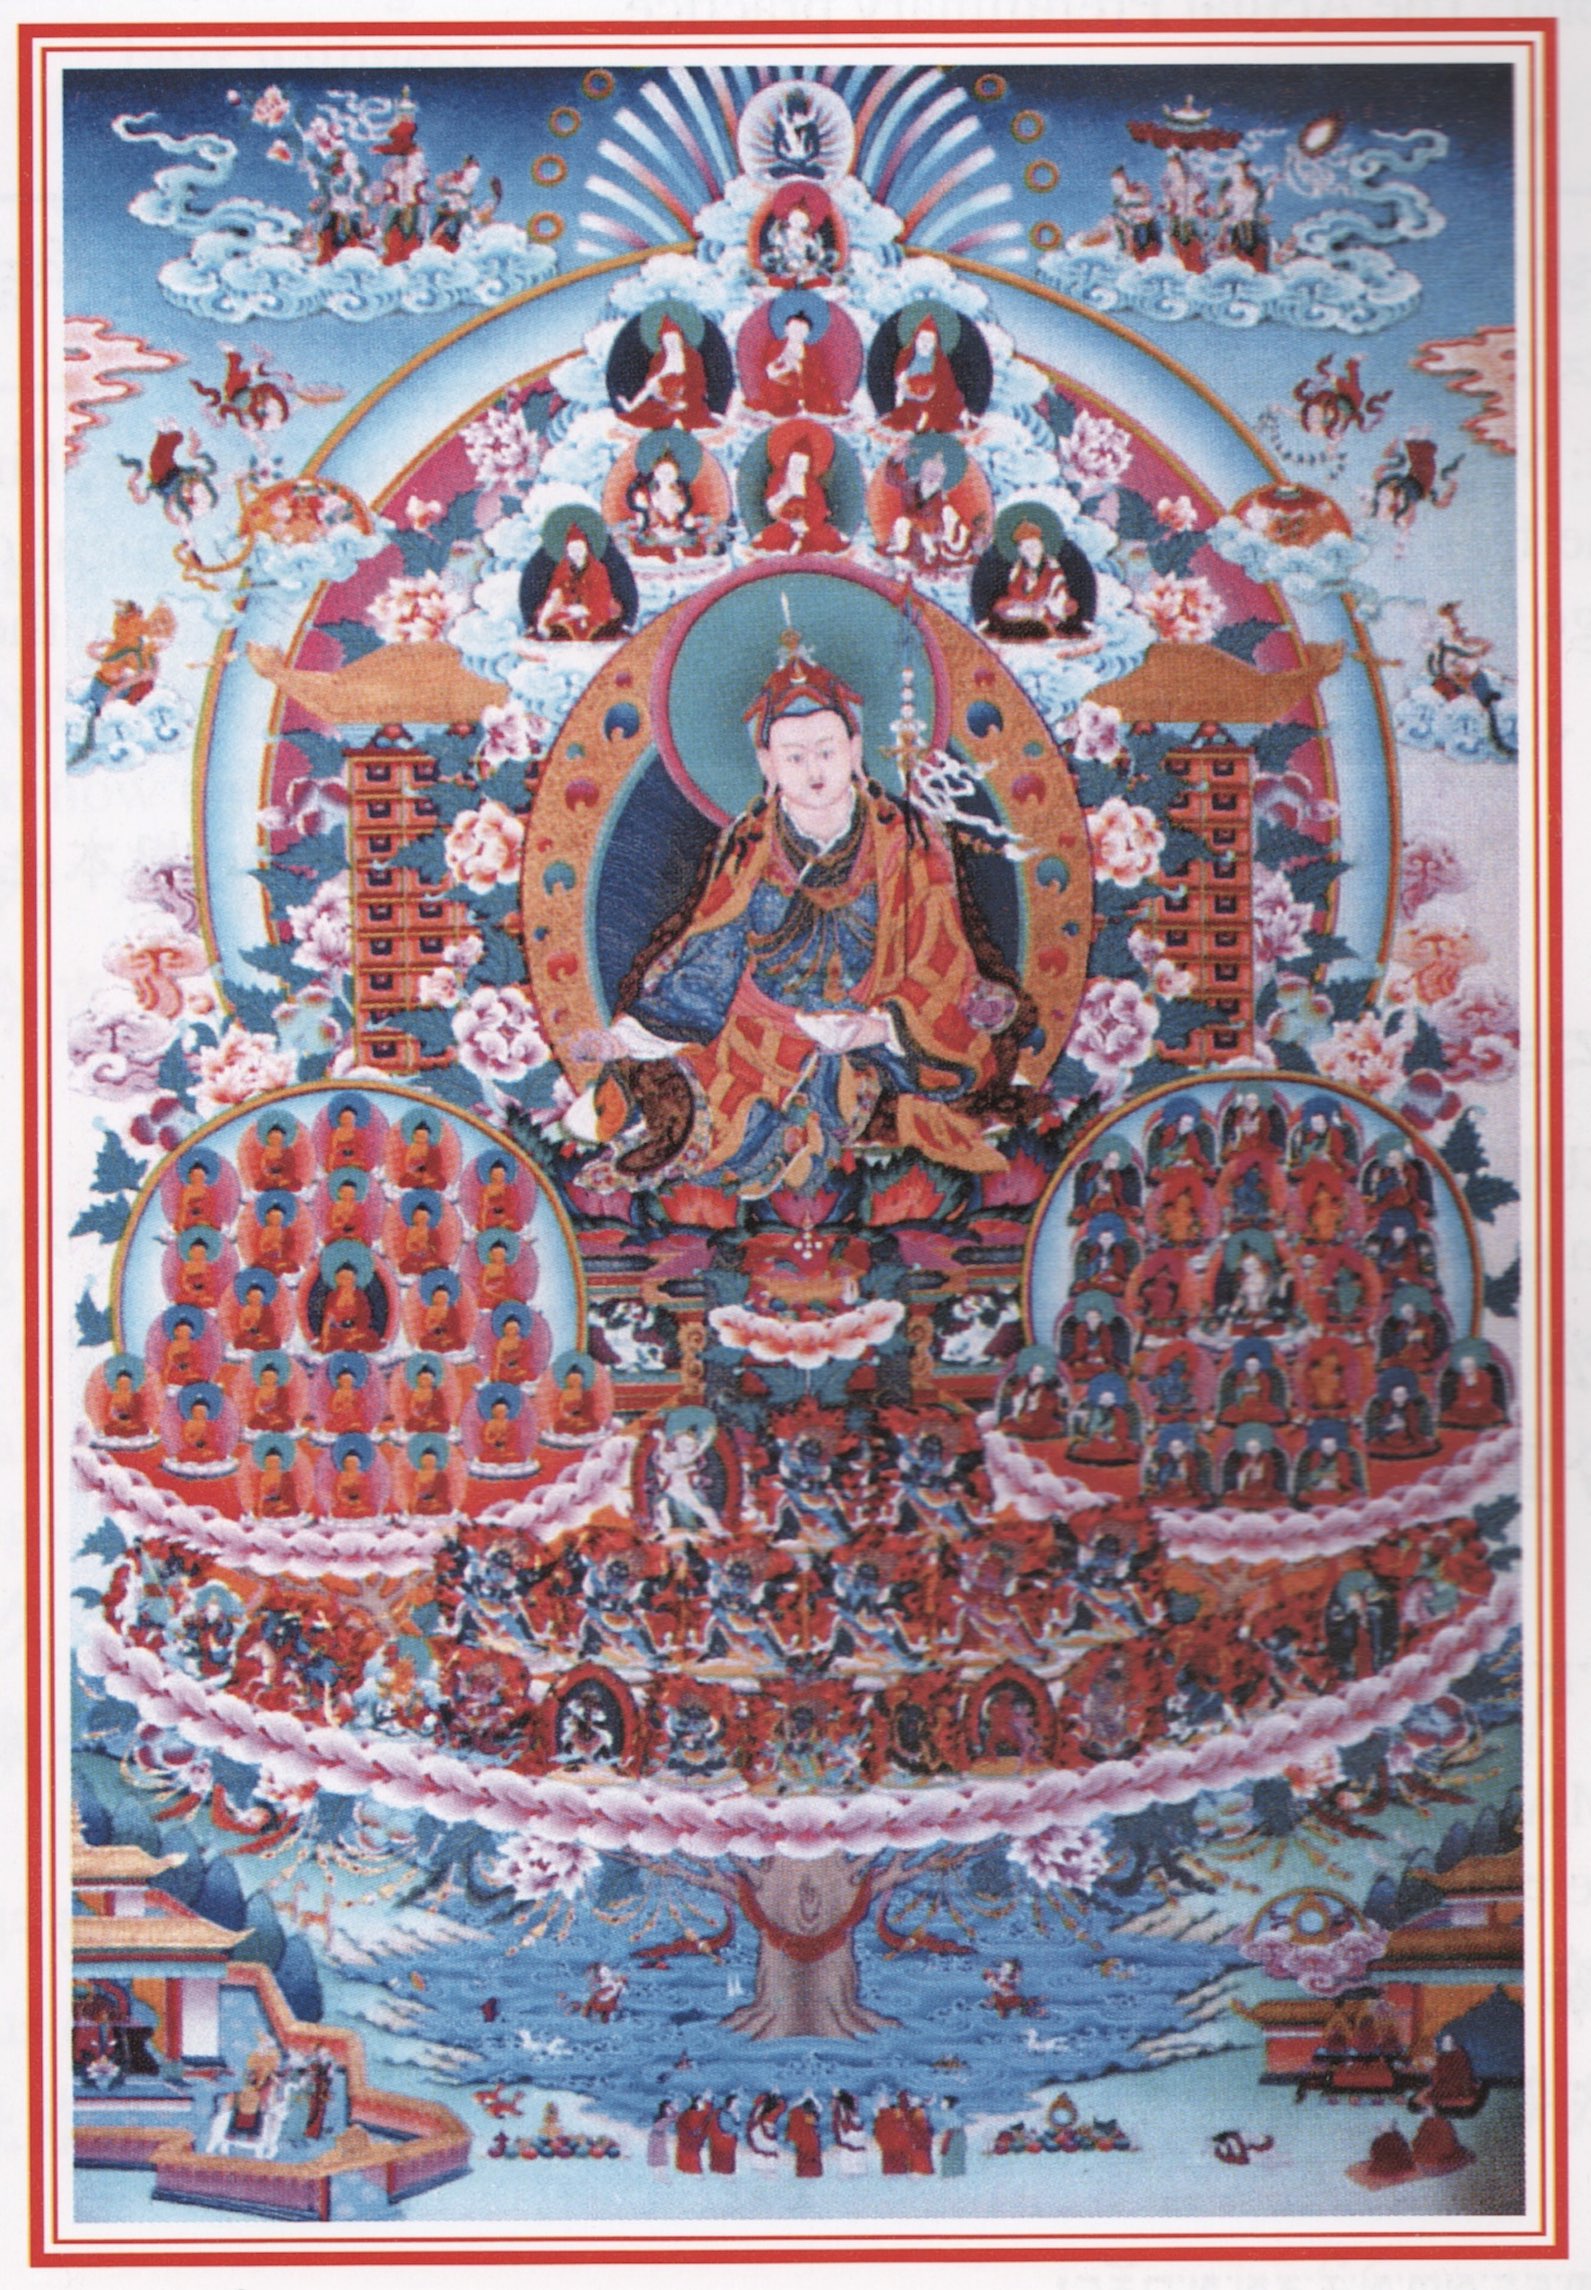 Event - An Introduction to the Vajrayana Preliminary Practices: Ngondro